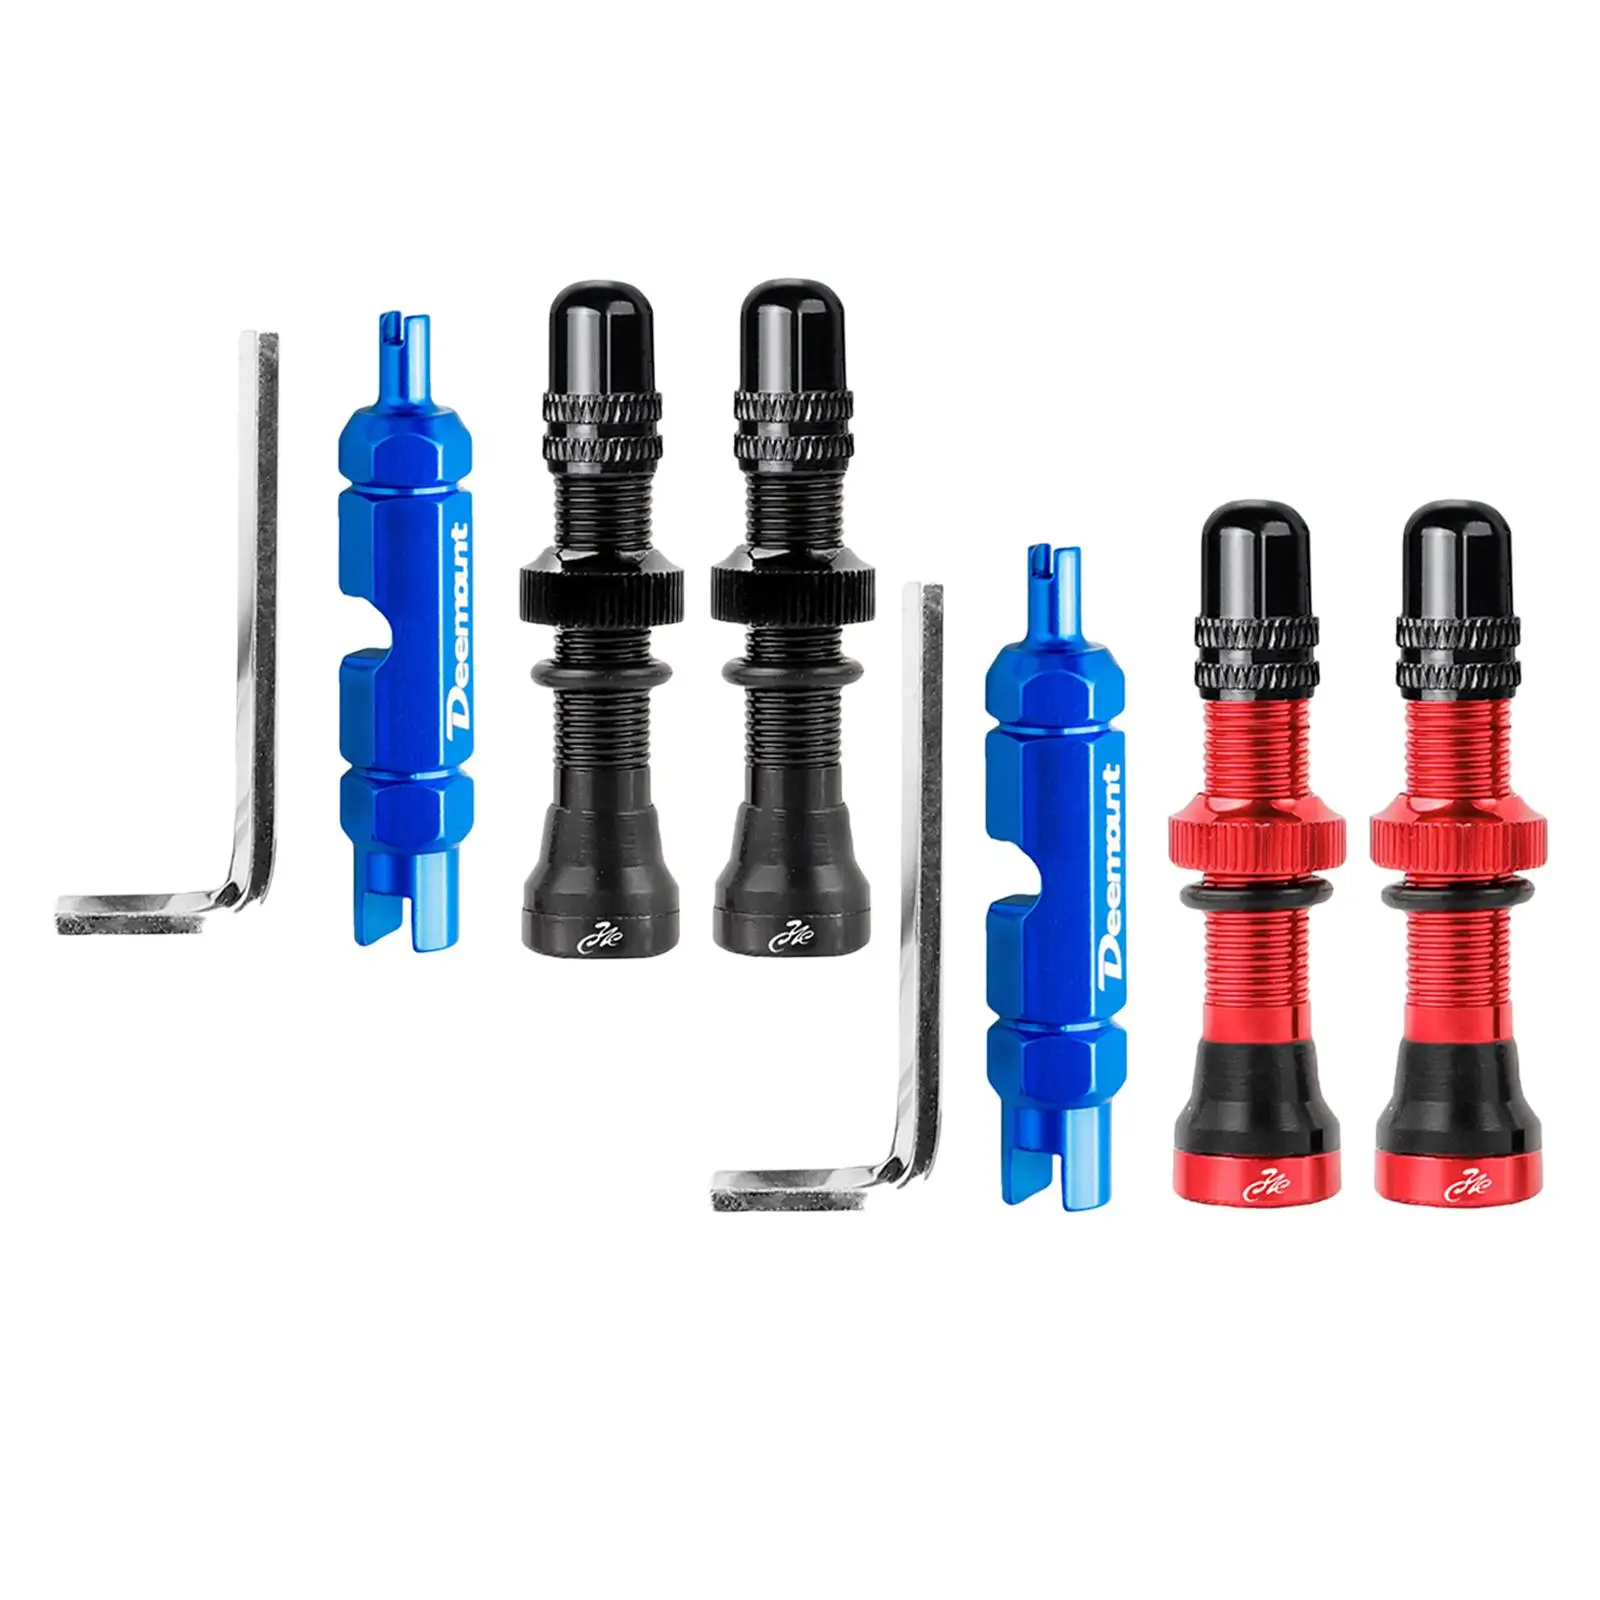 Valve , Replacement  Valve Remover Tool Kit, Tubeless Valve Core for Universal Road Bike Car with Wrench